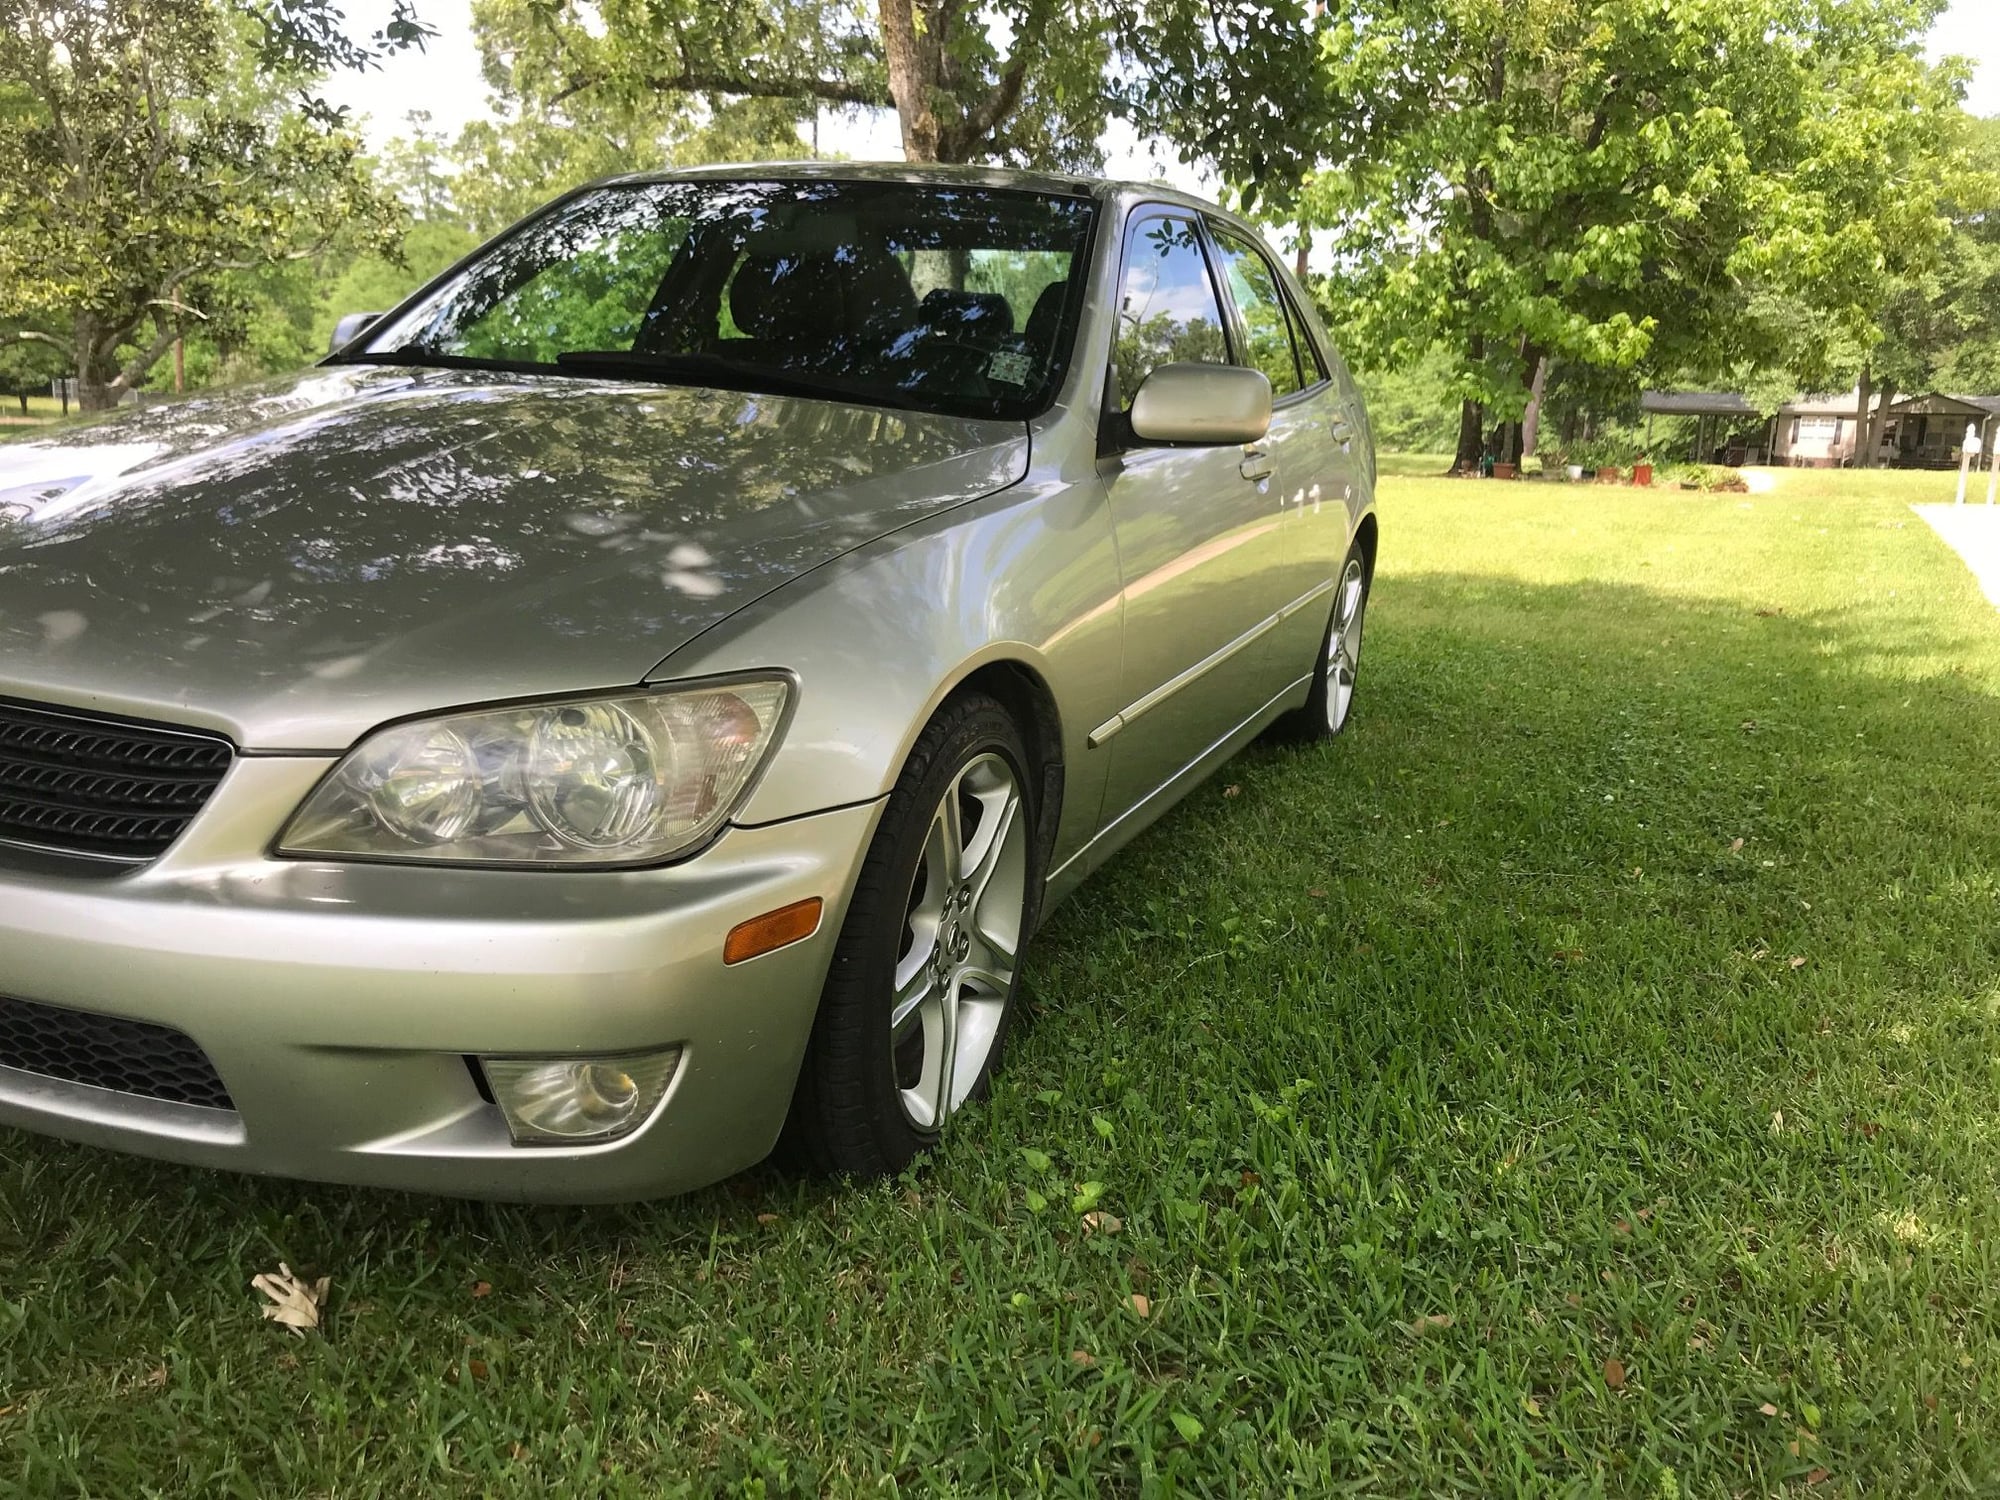 2002 Lexus IS300 - 2002 IS300 5=speed manual - Used - VIN JTHBD192120059356 - 187,000 Miles - 6 cyl - 2WD - Manual - Sedan - Silver - Florence,, MS 30973, United States